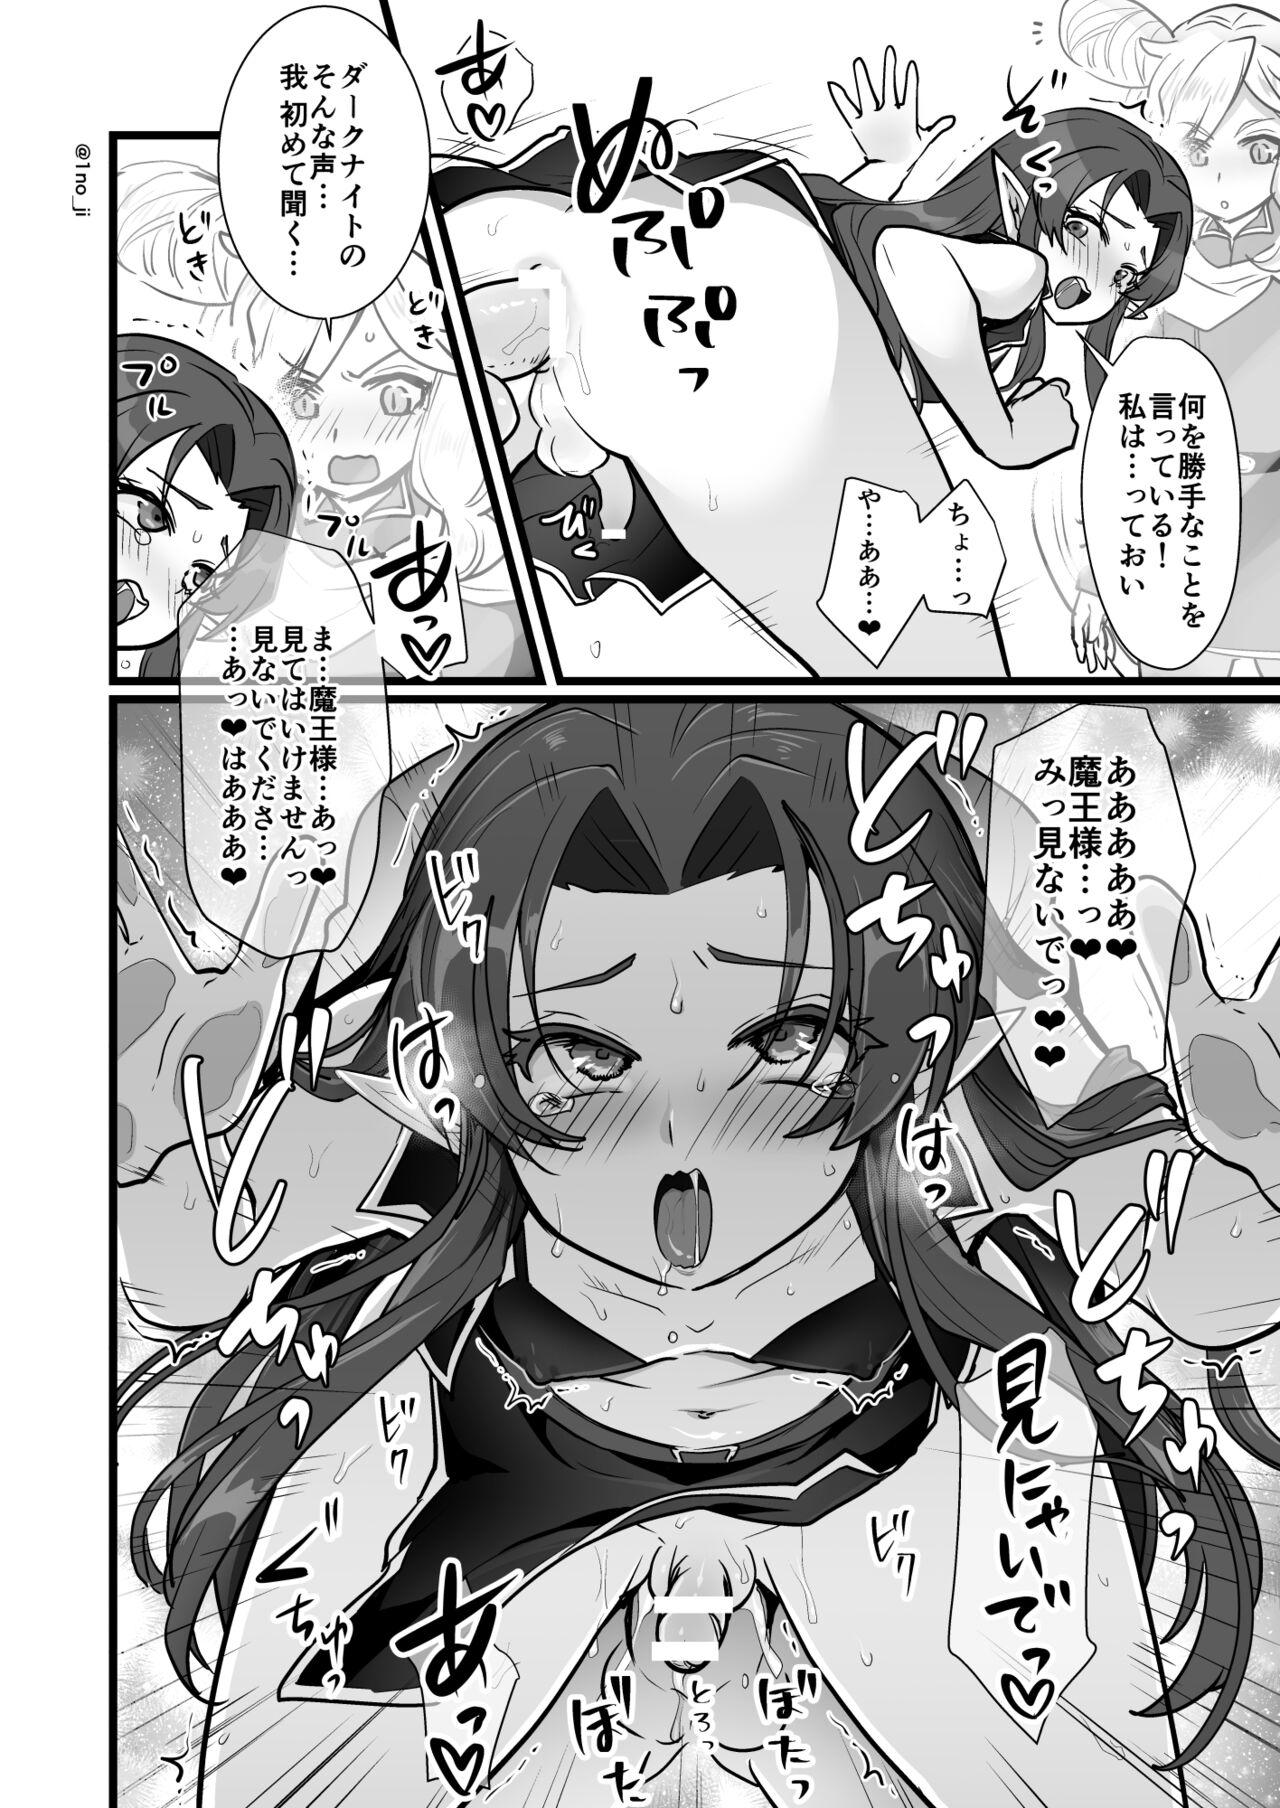 Couch 魔王軍の元幹部♂が勇者に負けてメスにされる話2【ダークナイトさんシリーズ】 - Original Groping - Page 11